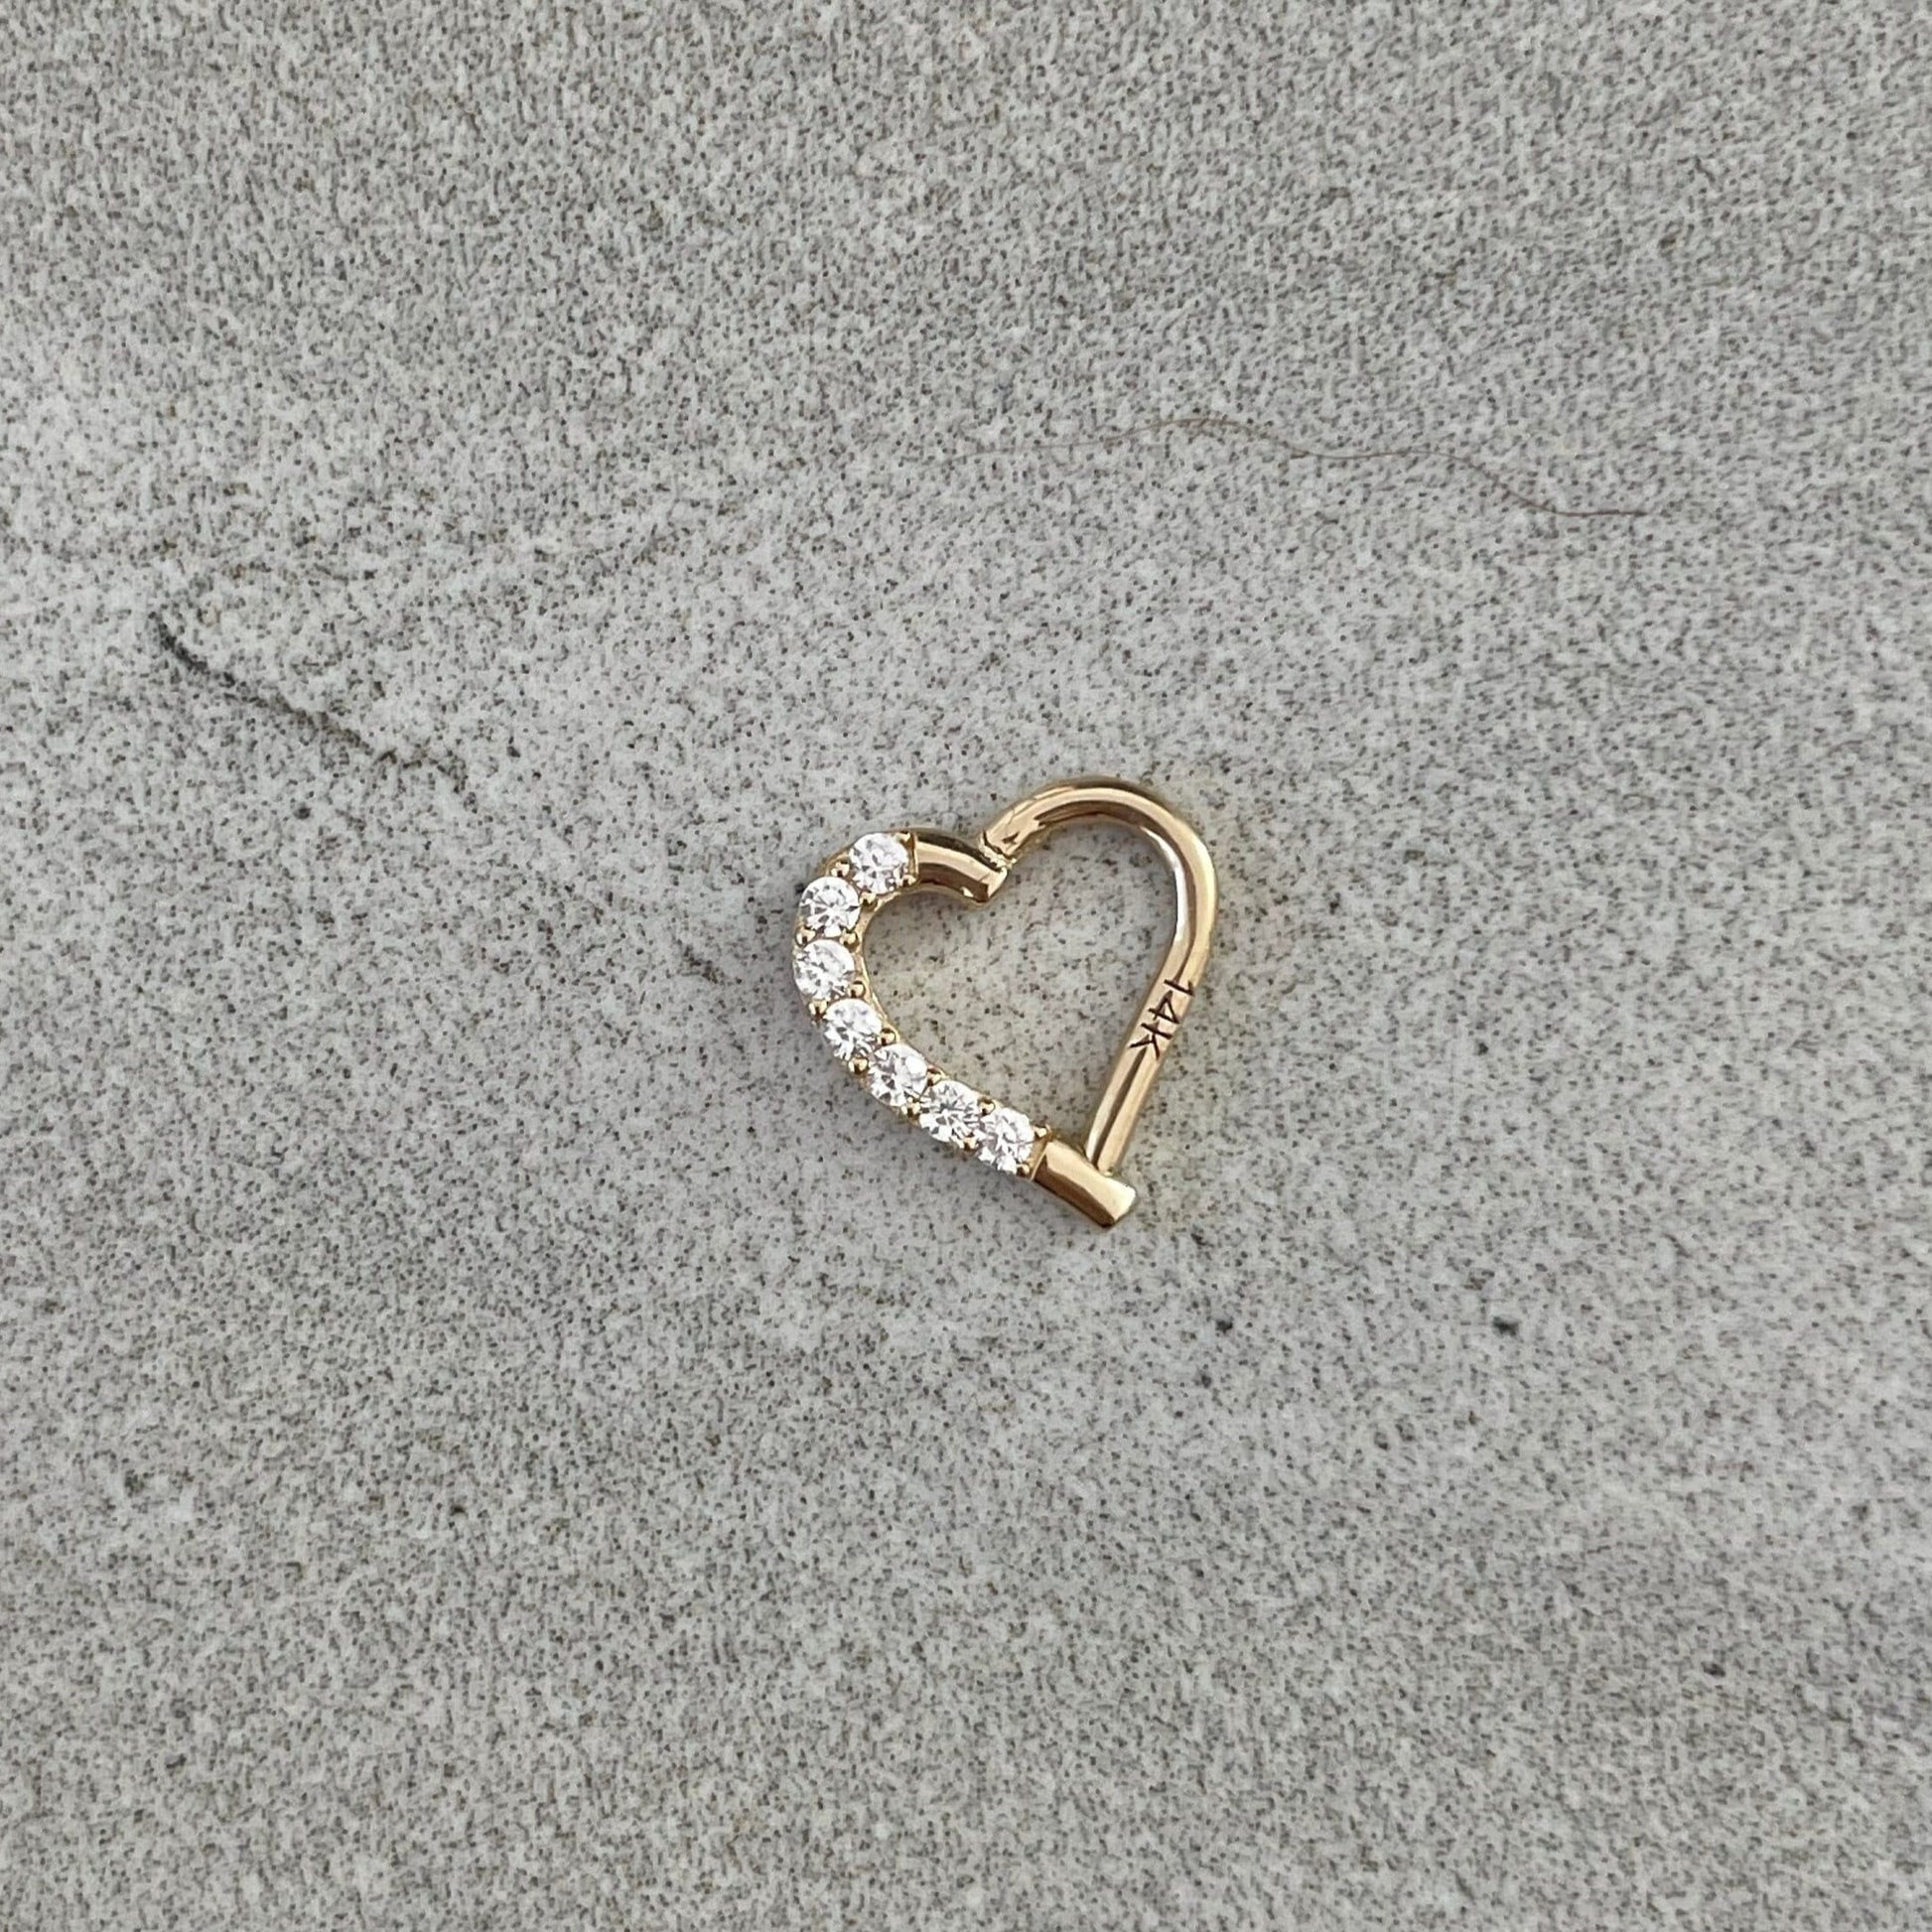 Solid White Gold Heart Daith Earring (16G | 8mm | 14k Solid Gold | White or Yellow Gold)